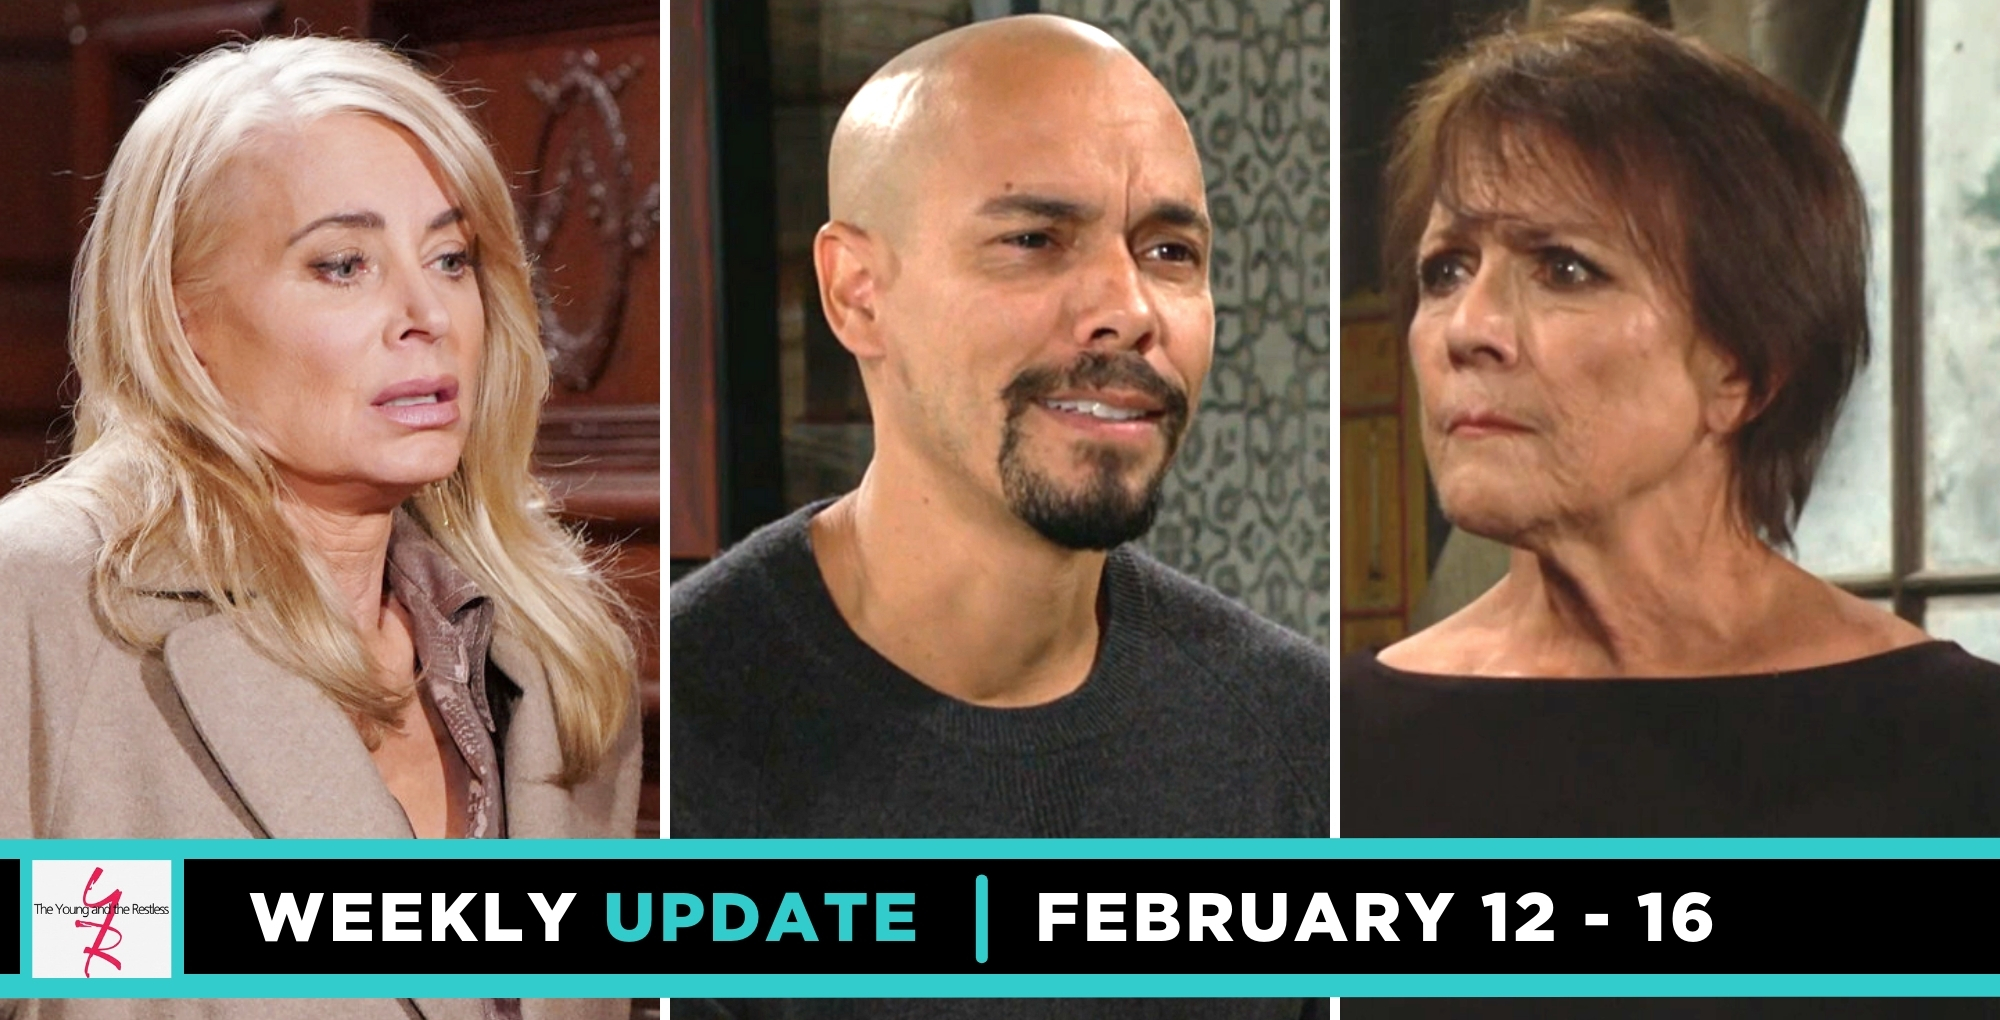 y&r spoilers weekly update for february 12 -16 features ashley, devon, and jordan.